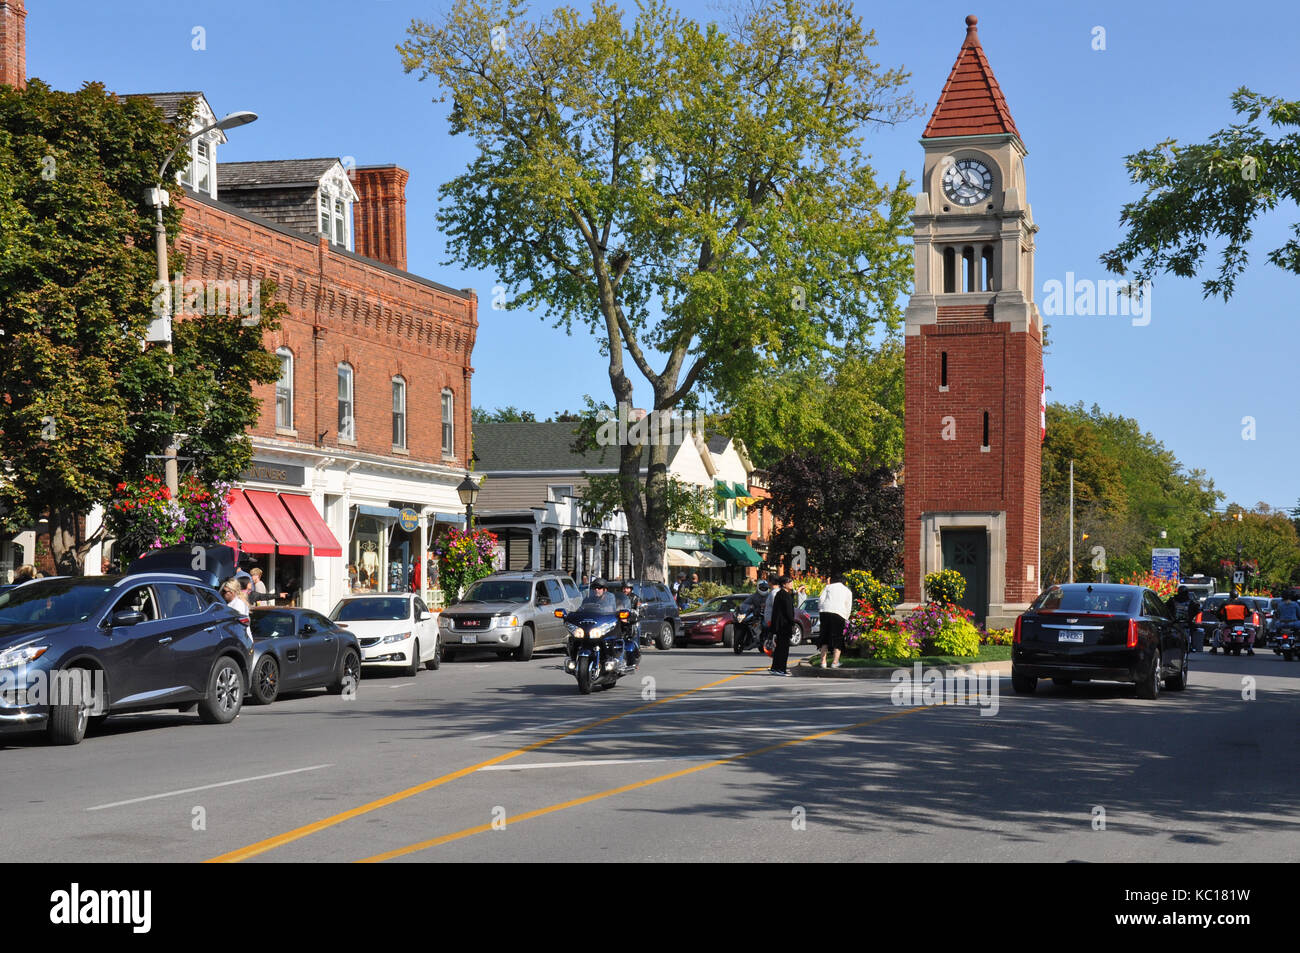 Niagara-on-the-Lake, Ontario, Canada - September 10, 2017 - Street View with People and Bicycles sitting on a Porch of a Tourist Inn - Editorial Stock Photo